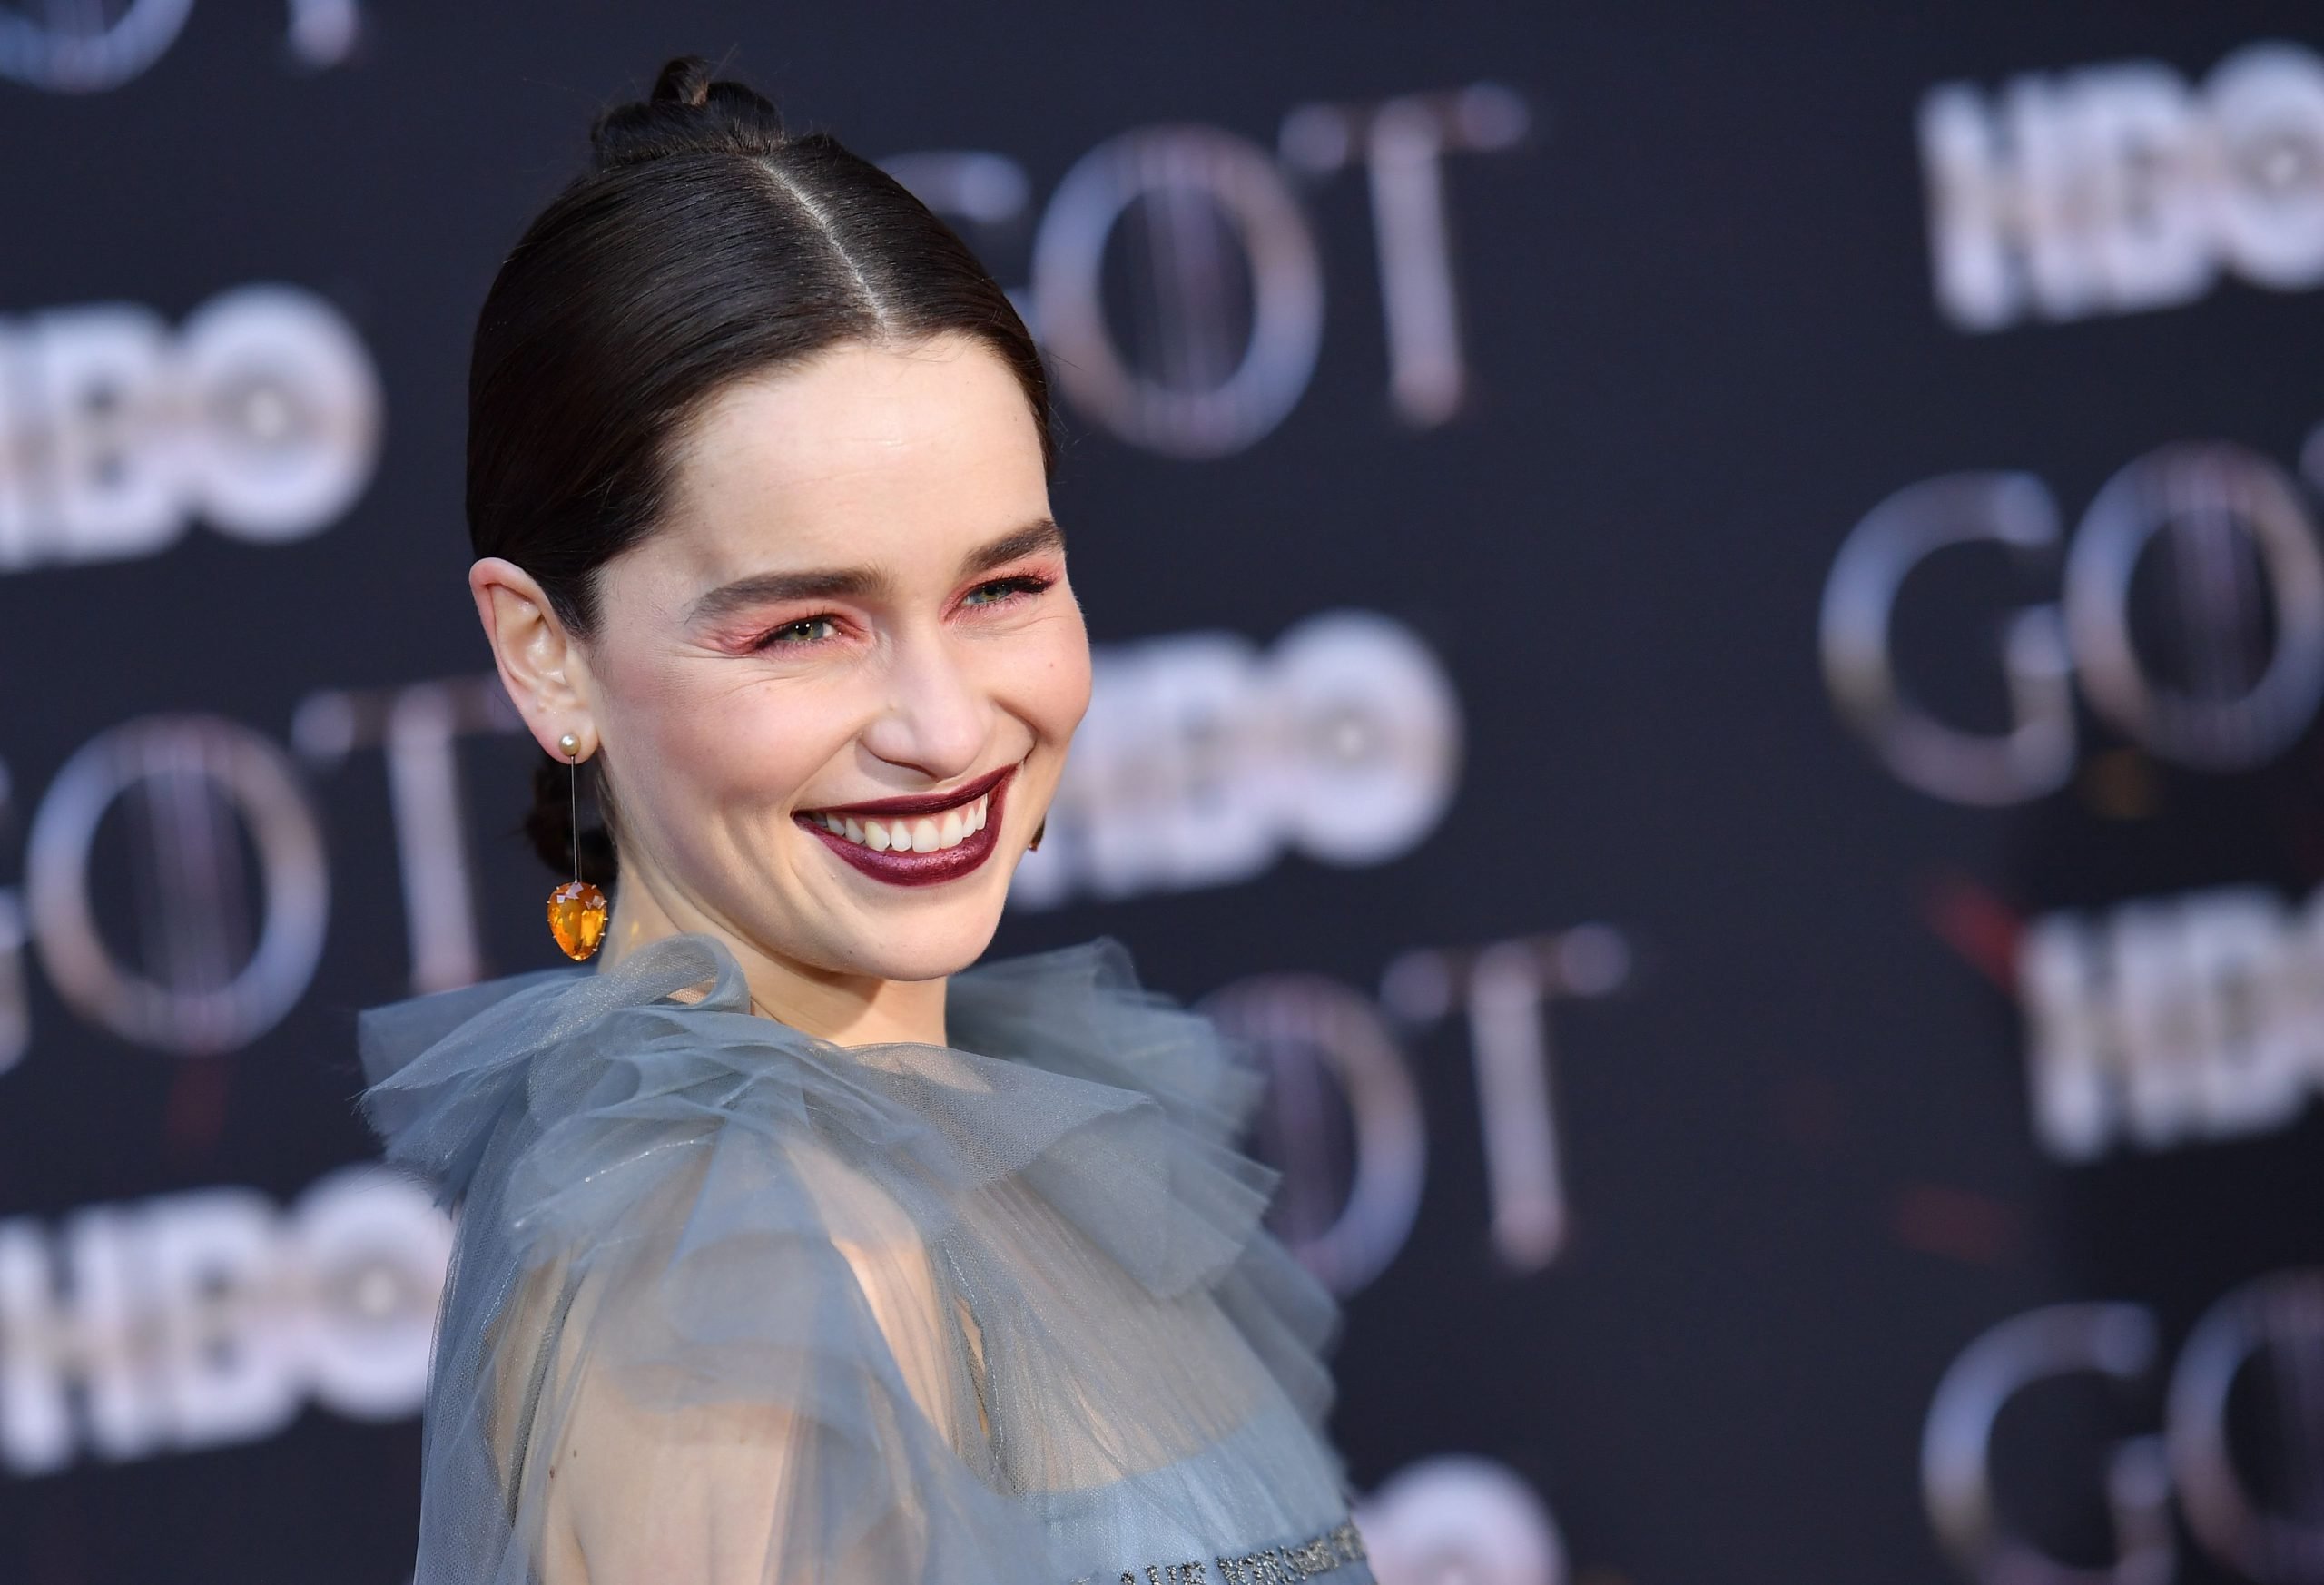 Emilia Clarke Says ‘Game of Thrones’ Ending Would Upset People ‘No Matter What We Did’